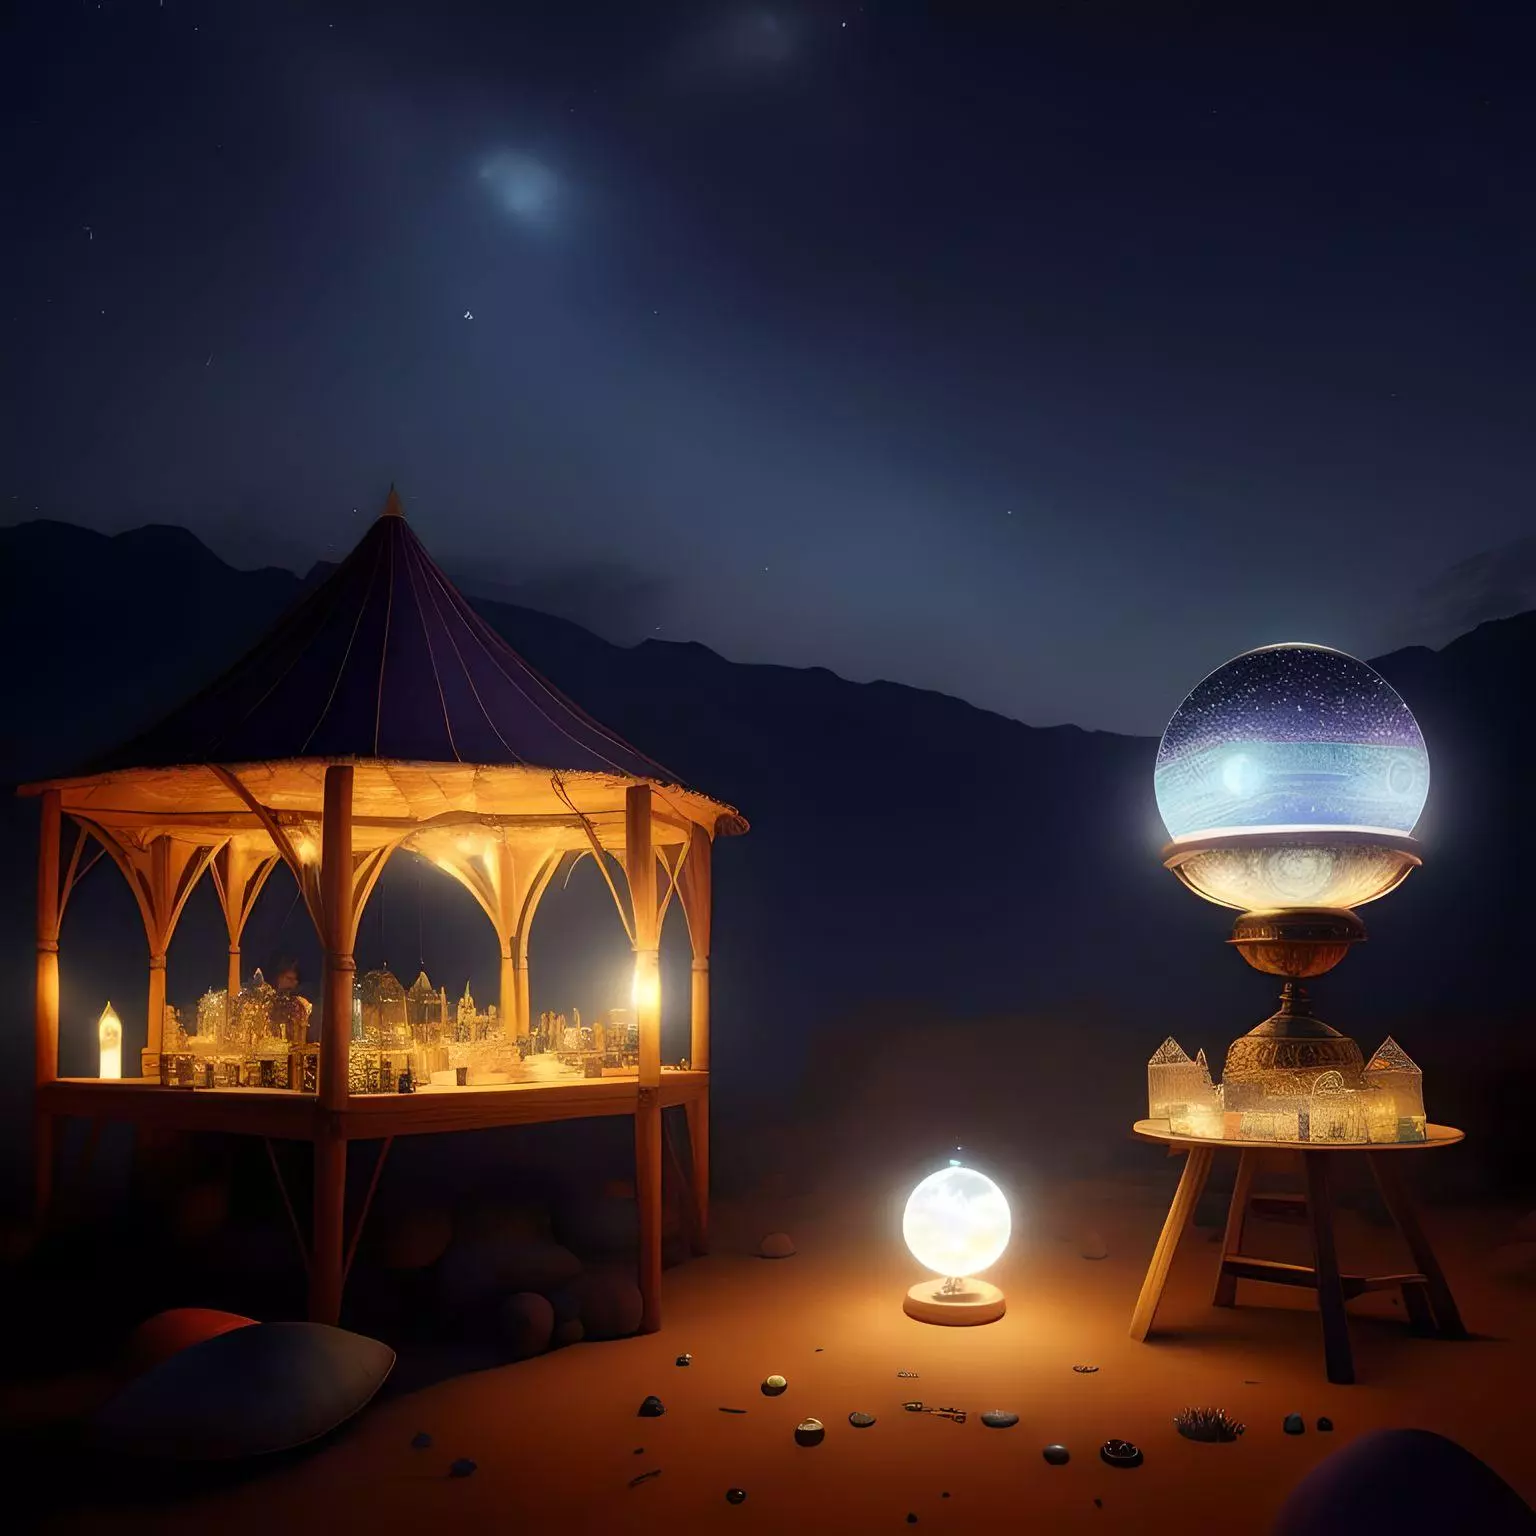 a fortune tellers tent in the desert with a lamp lighting up the space.